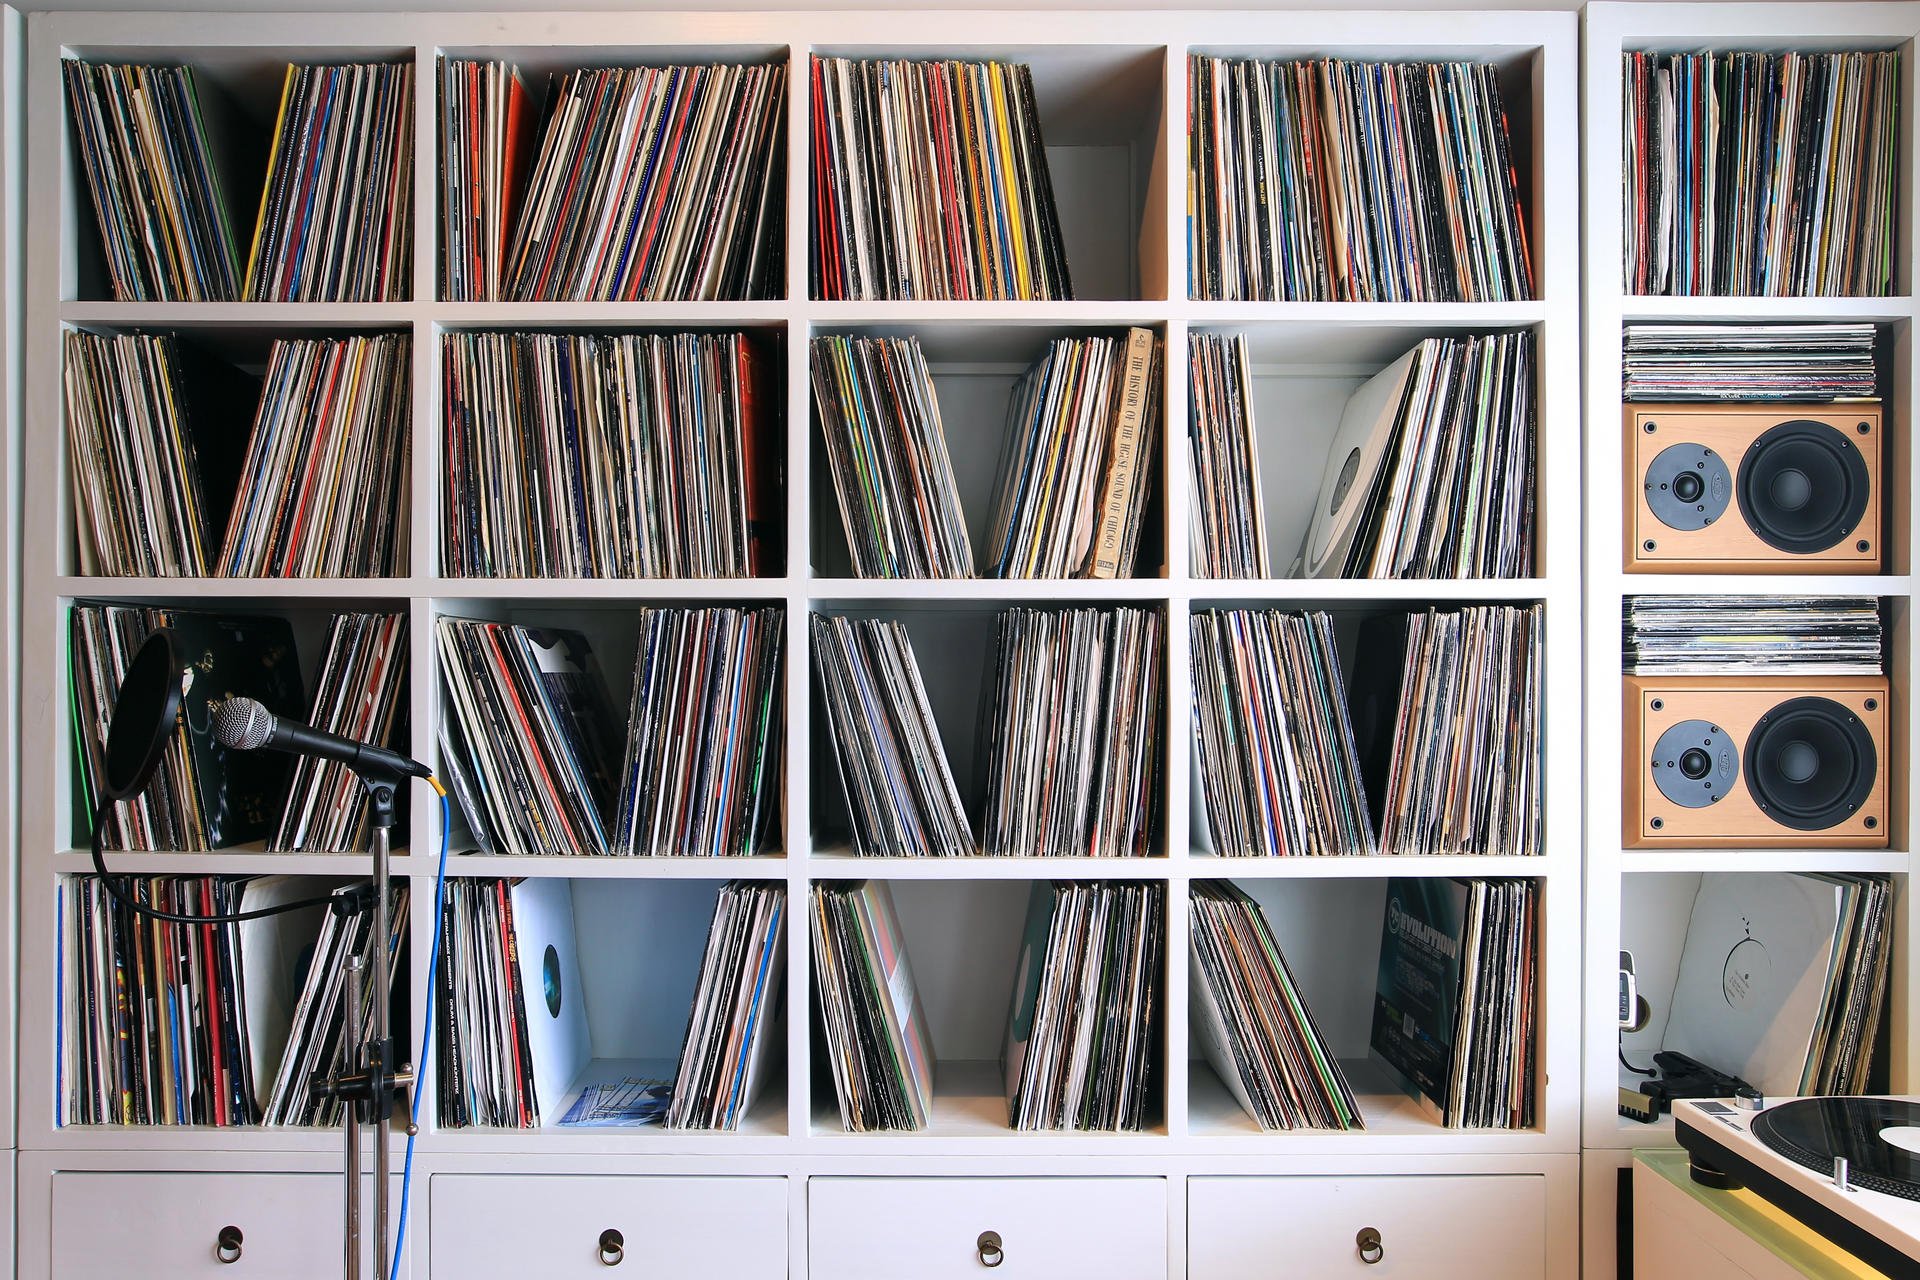 Vinyl sales rise as teenagers forego streaming – The Howler